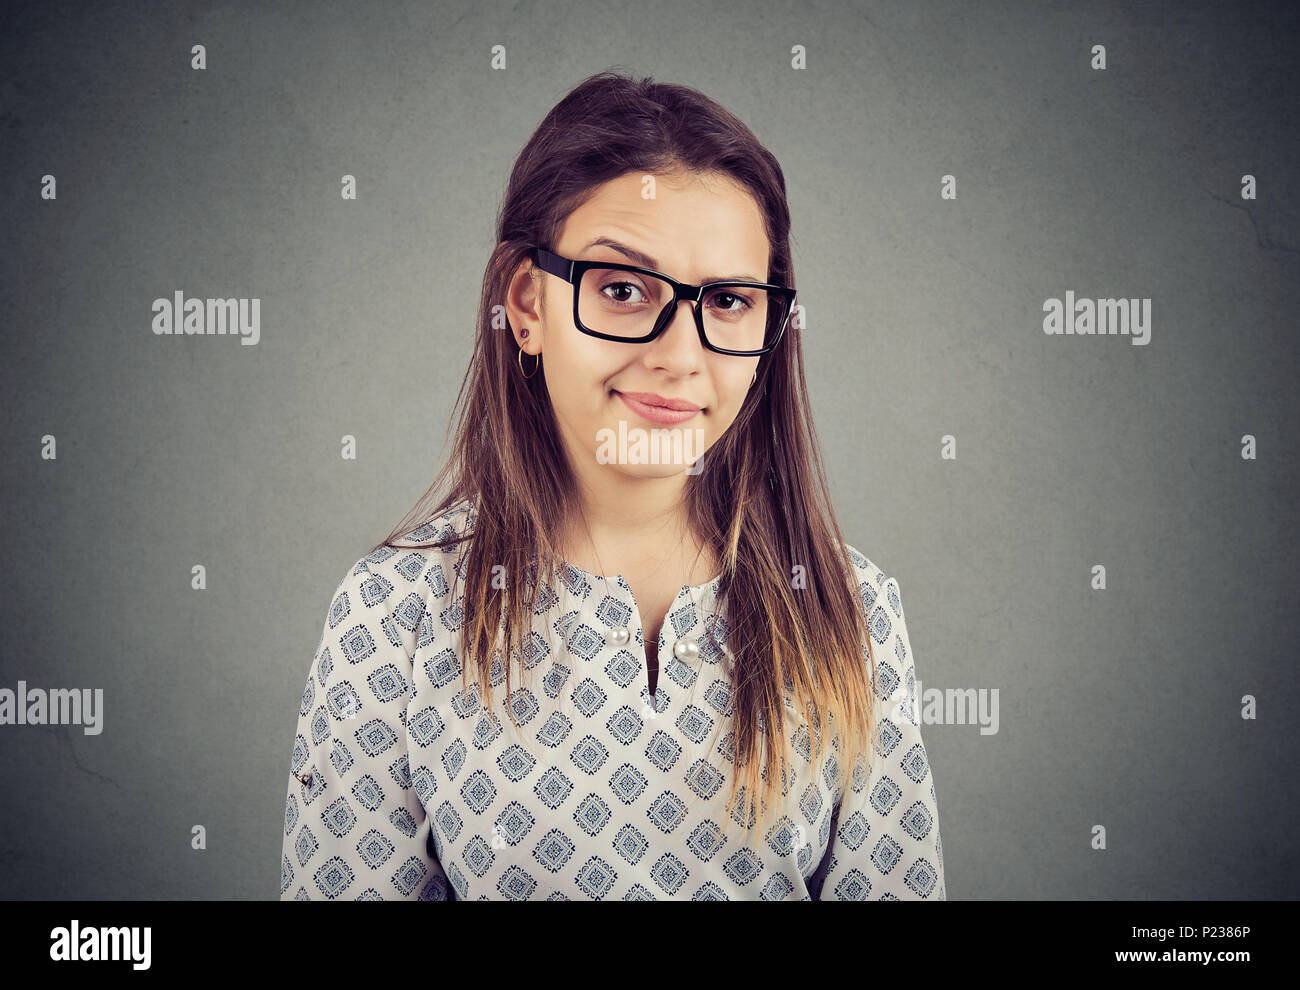 Woman with doubtful annoyed face expression Stock Photo